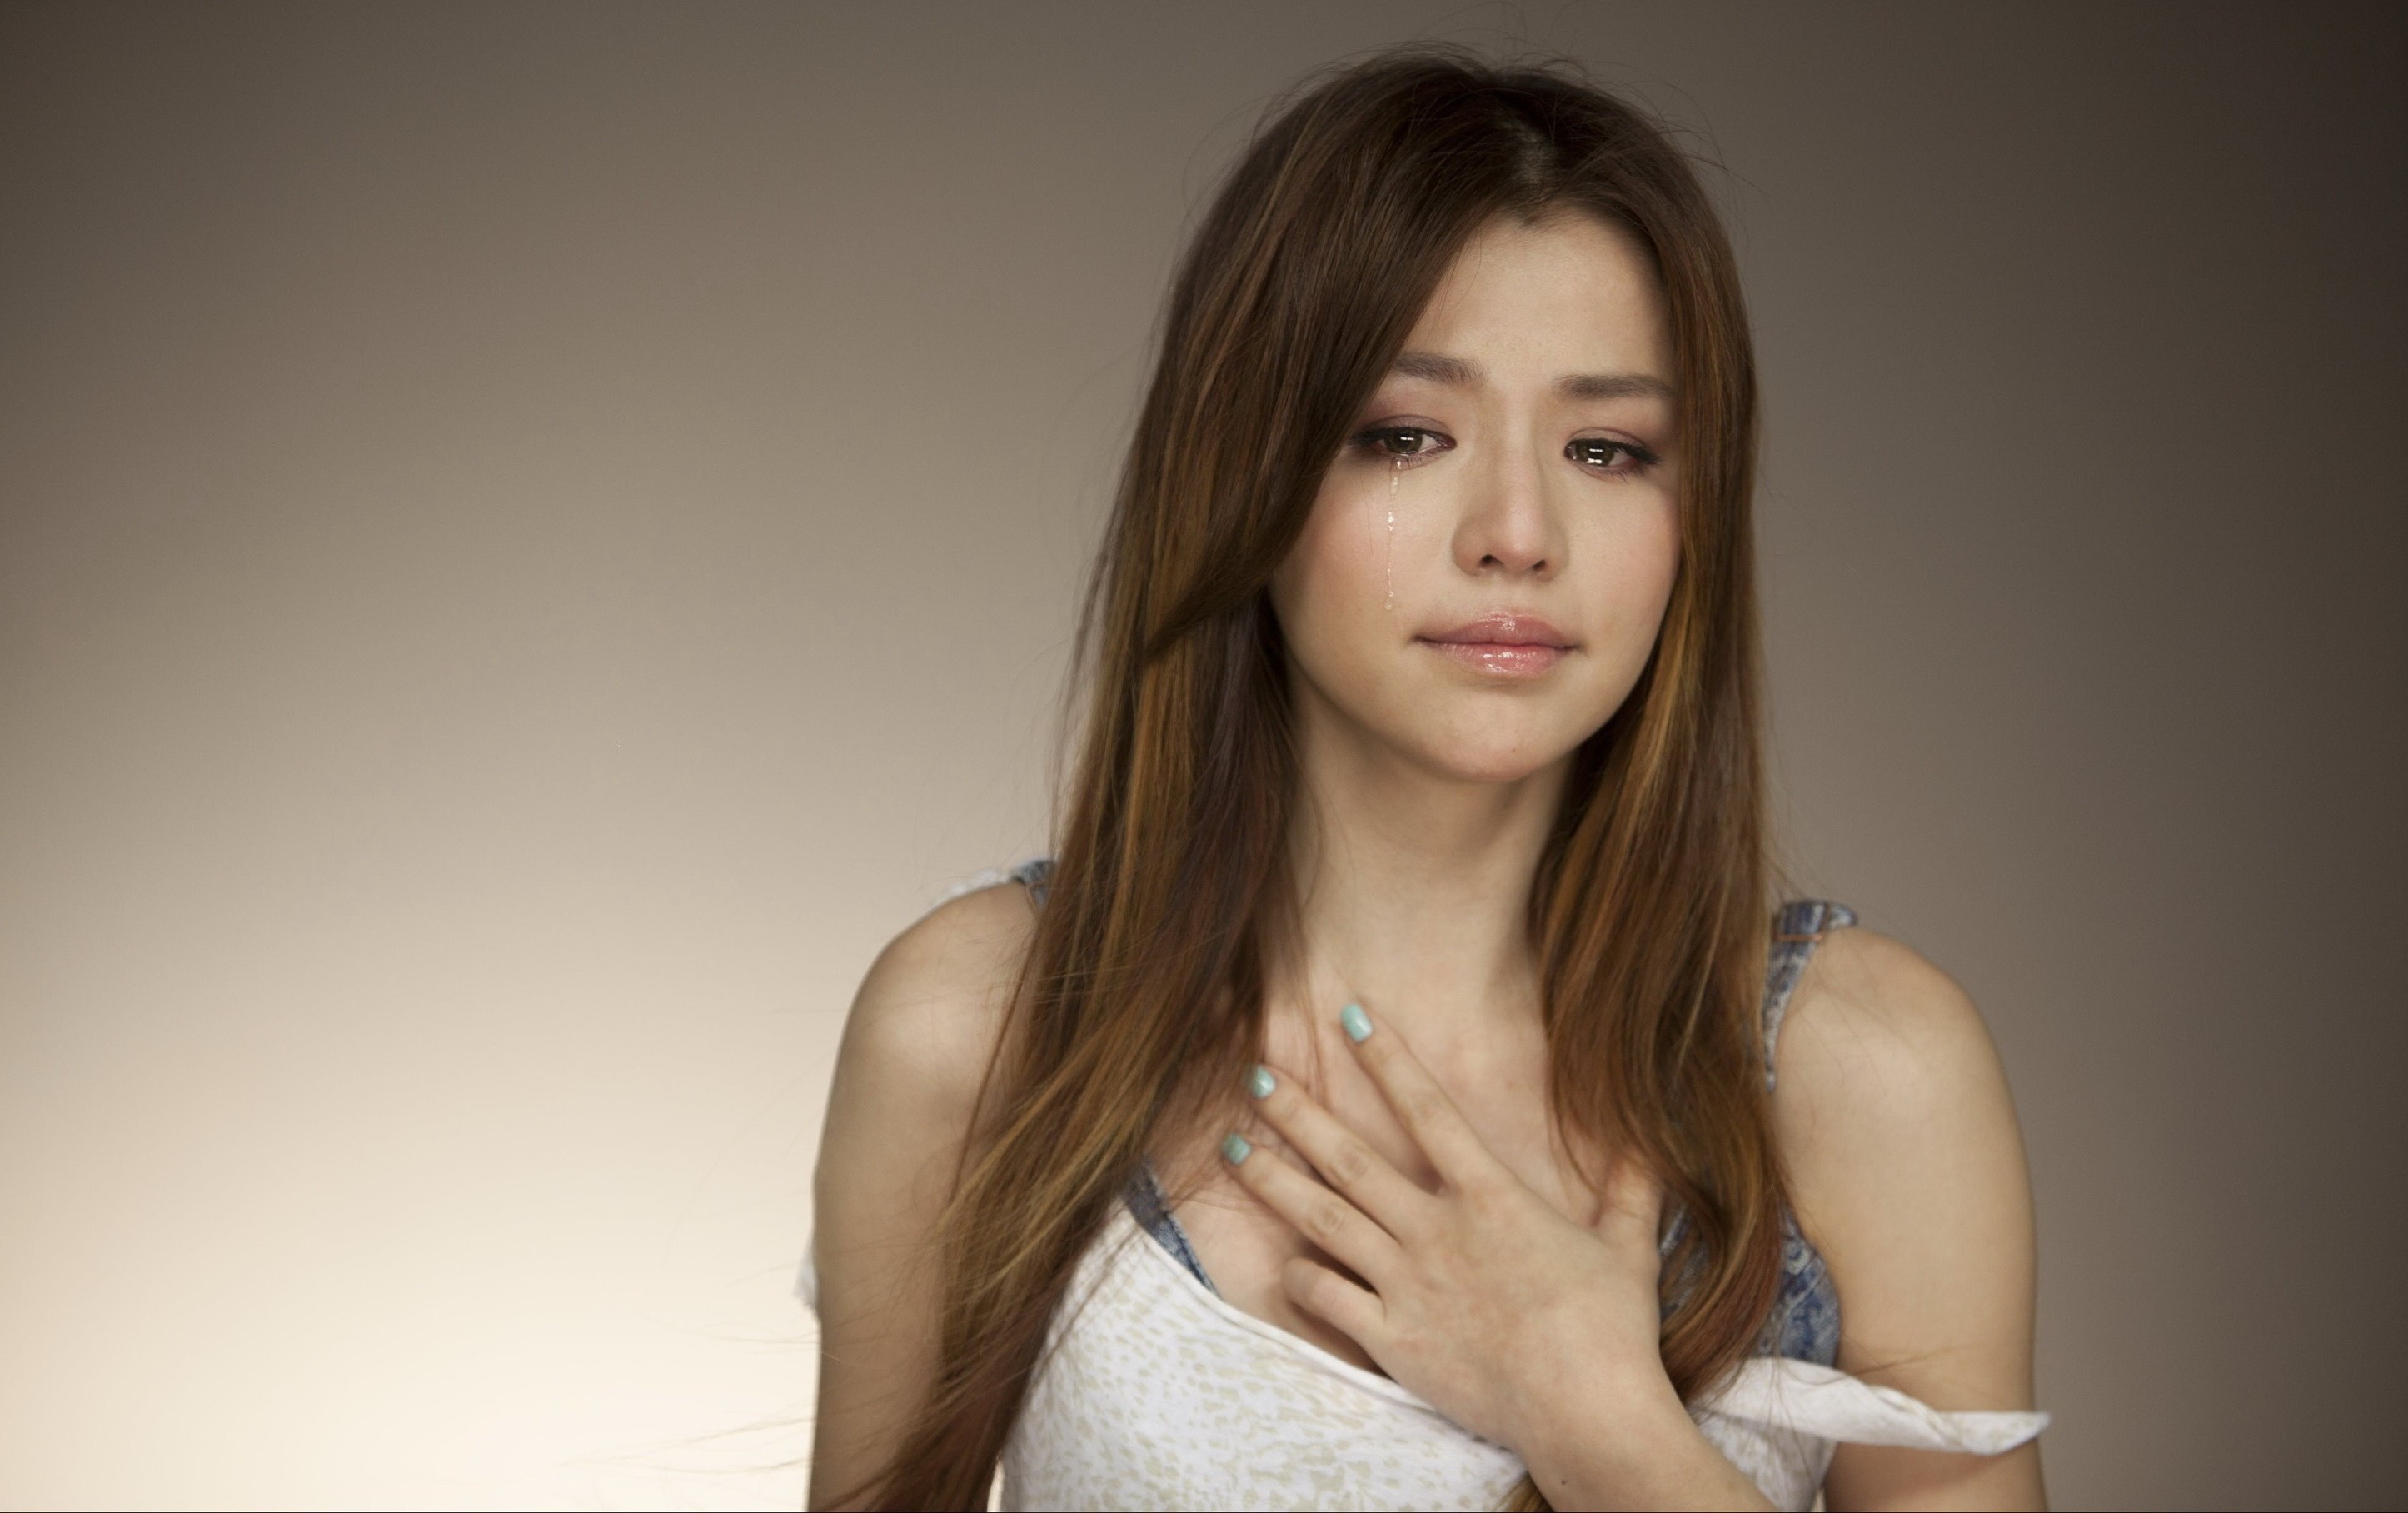 crying wallpaper,hair,face,skin,hairstyle,beauty